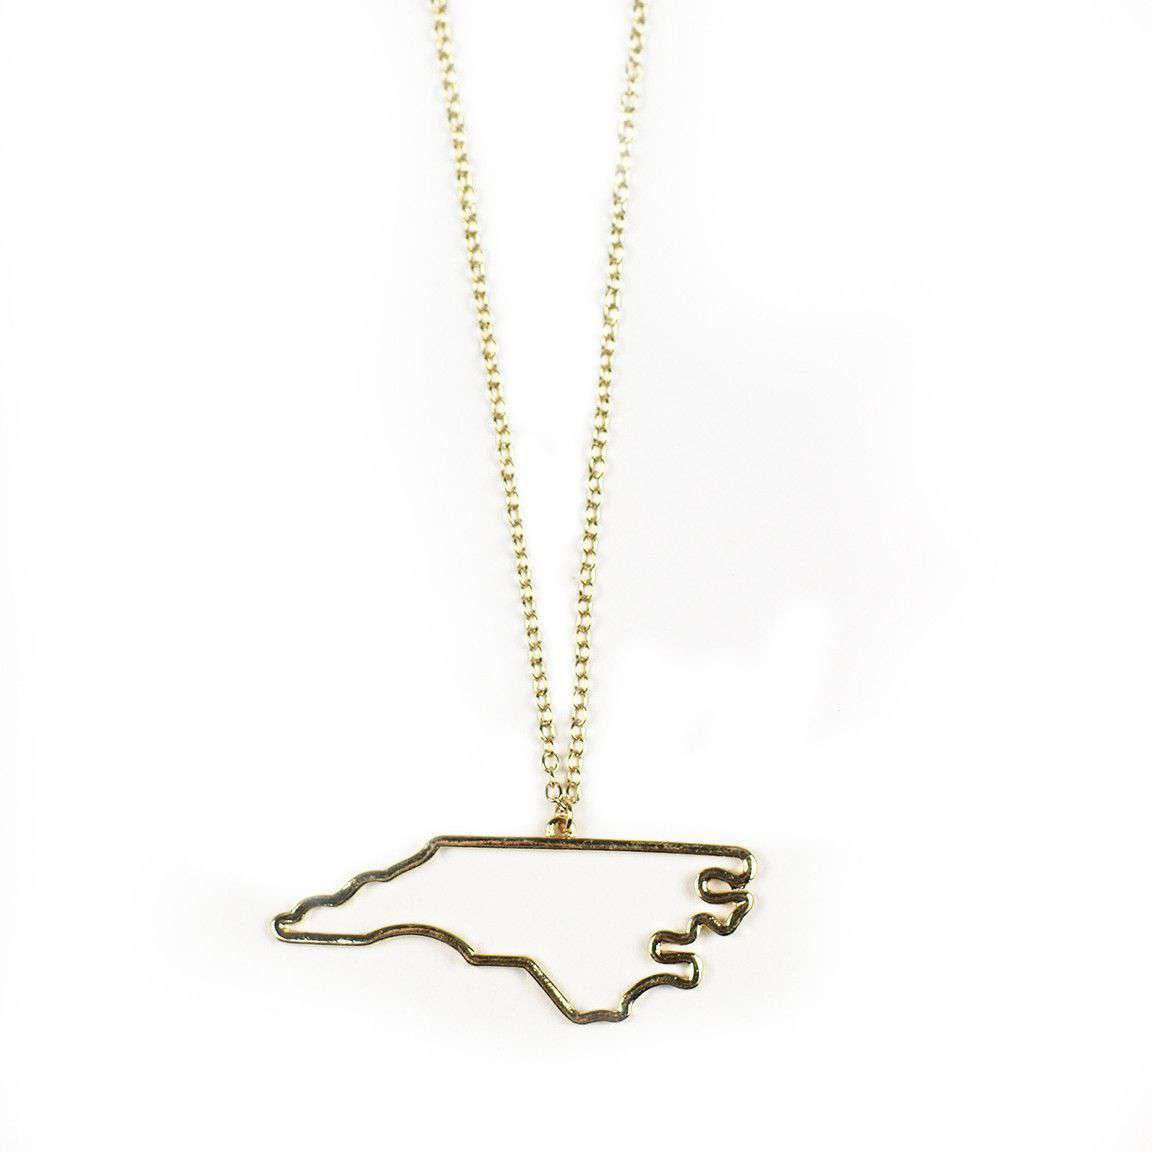 North Carolina Silhouette Necklace in Gold by Country Club Prep - Country Club Prep